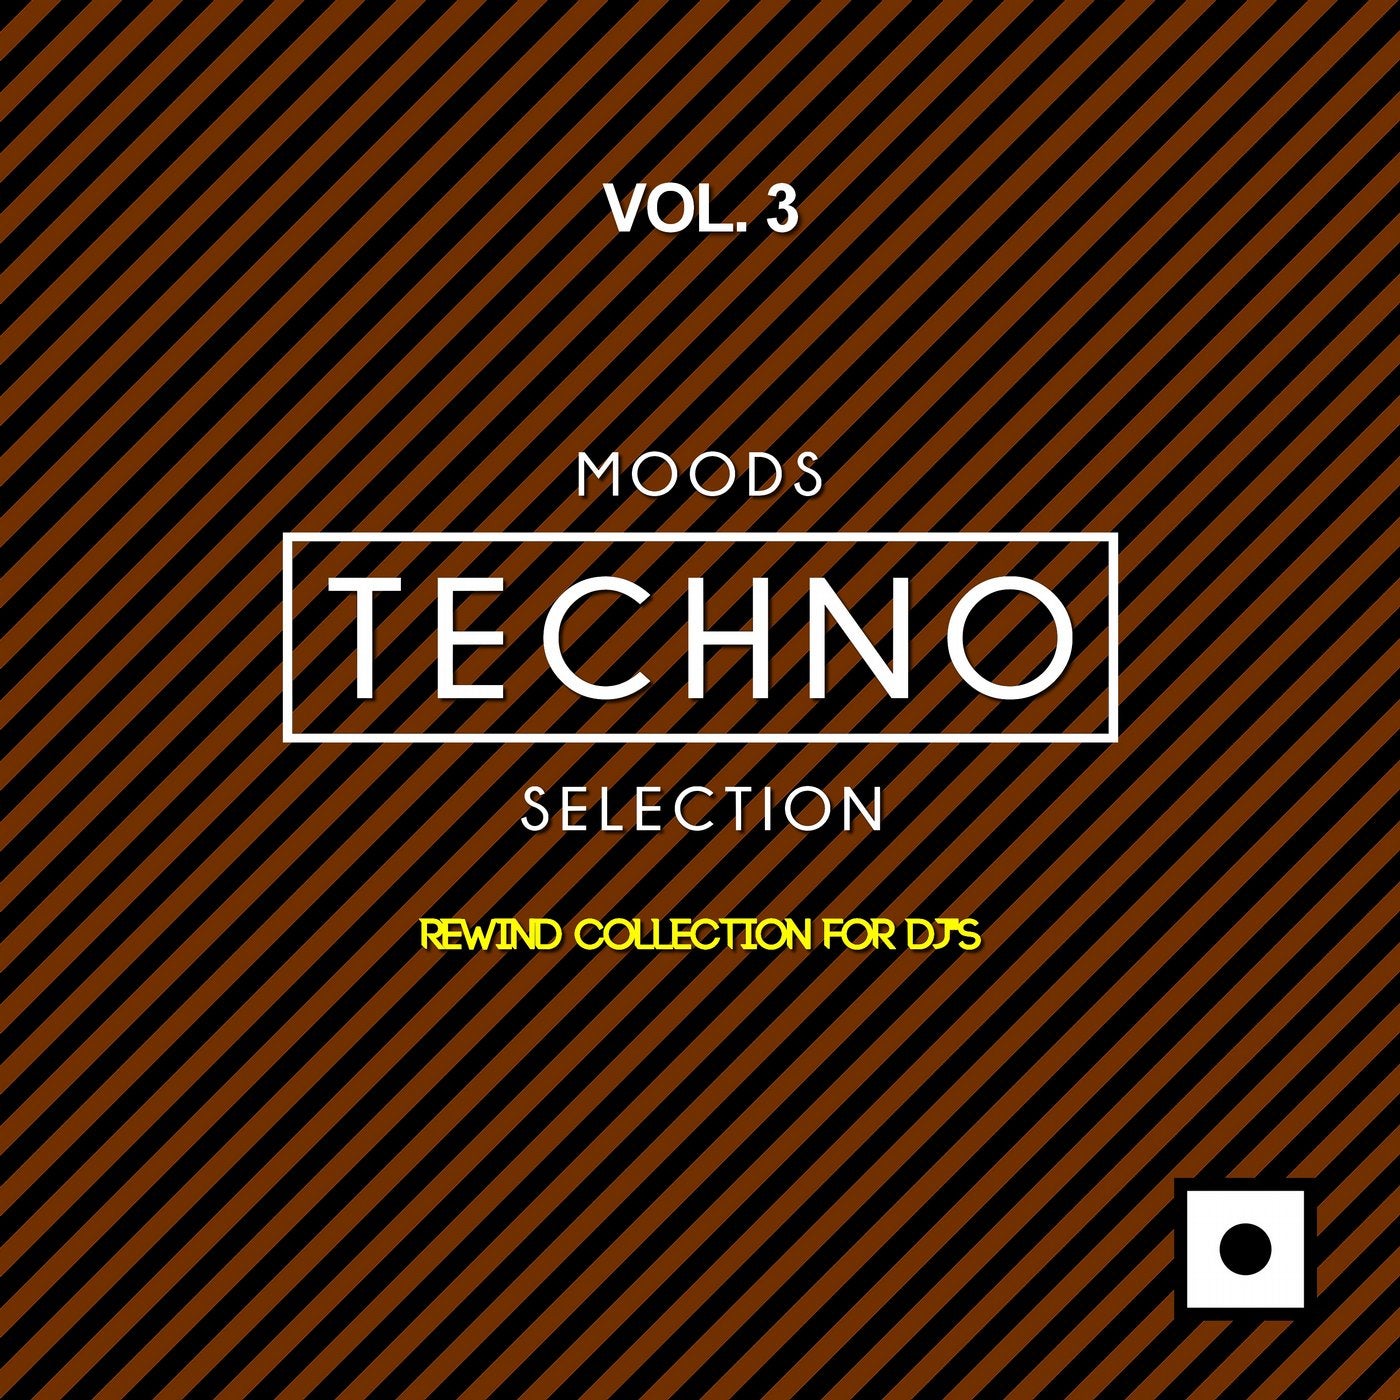 Moods Techno Selection, Vol. 3 (Rewind Collection For DJ's)